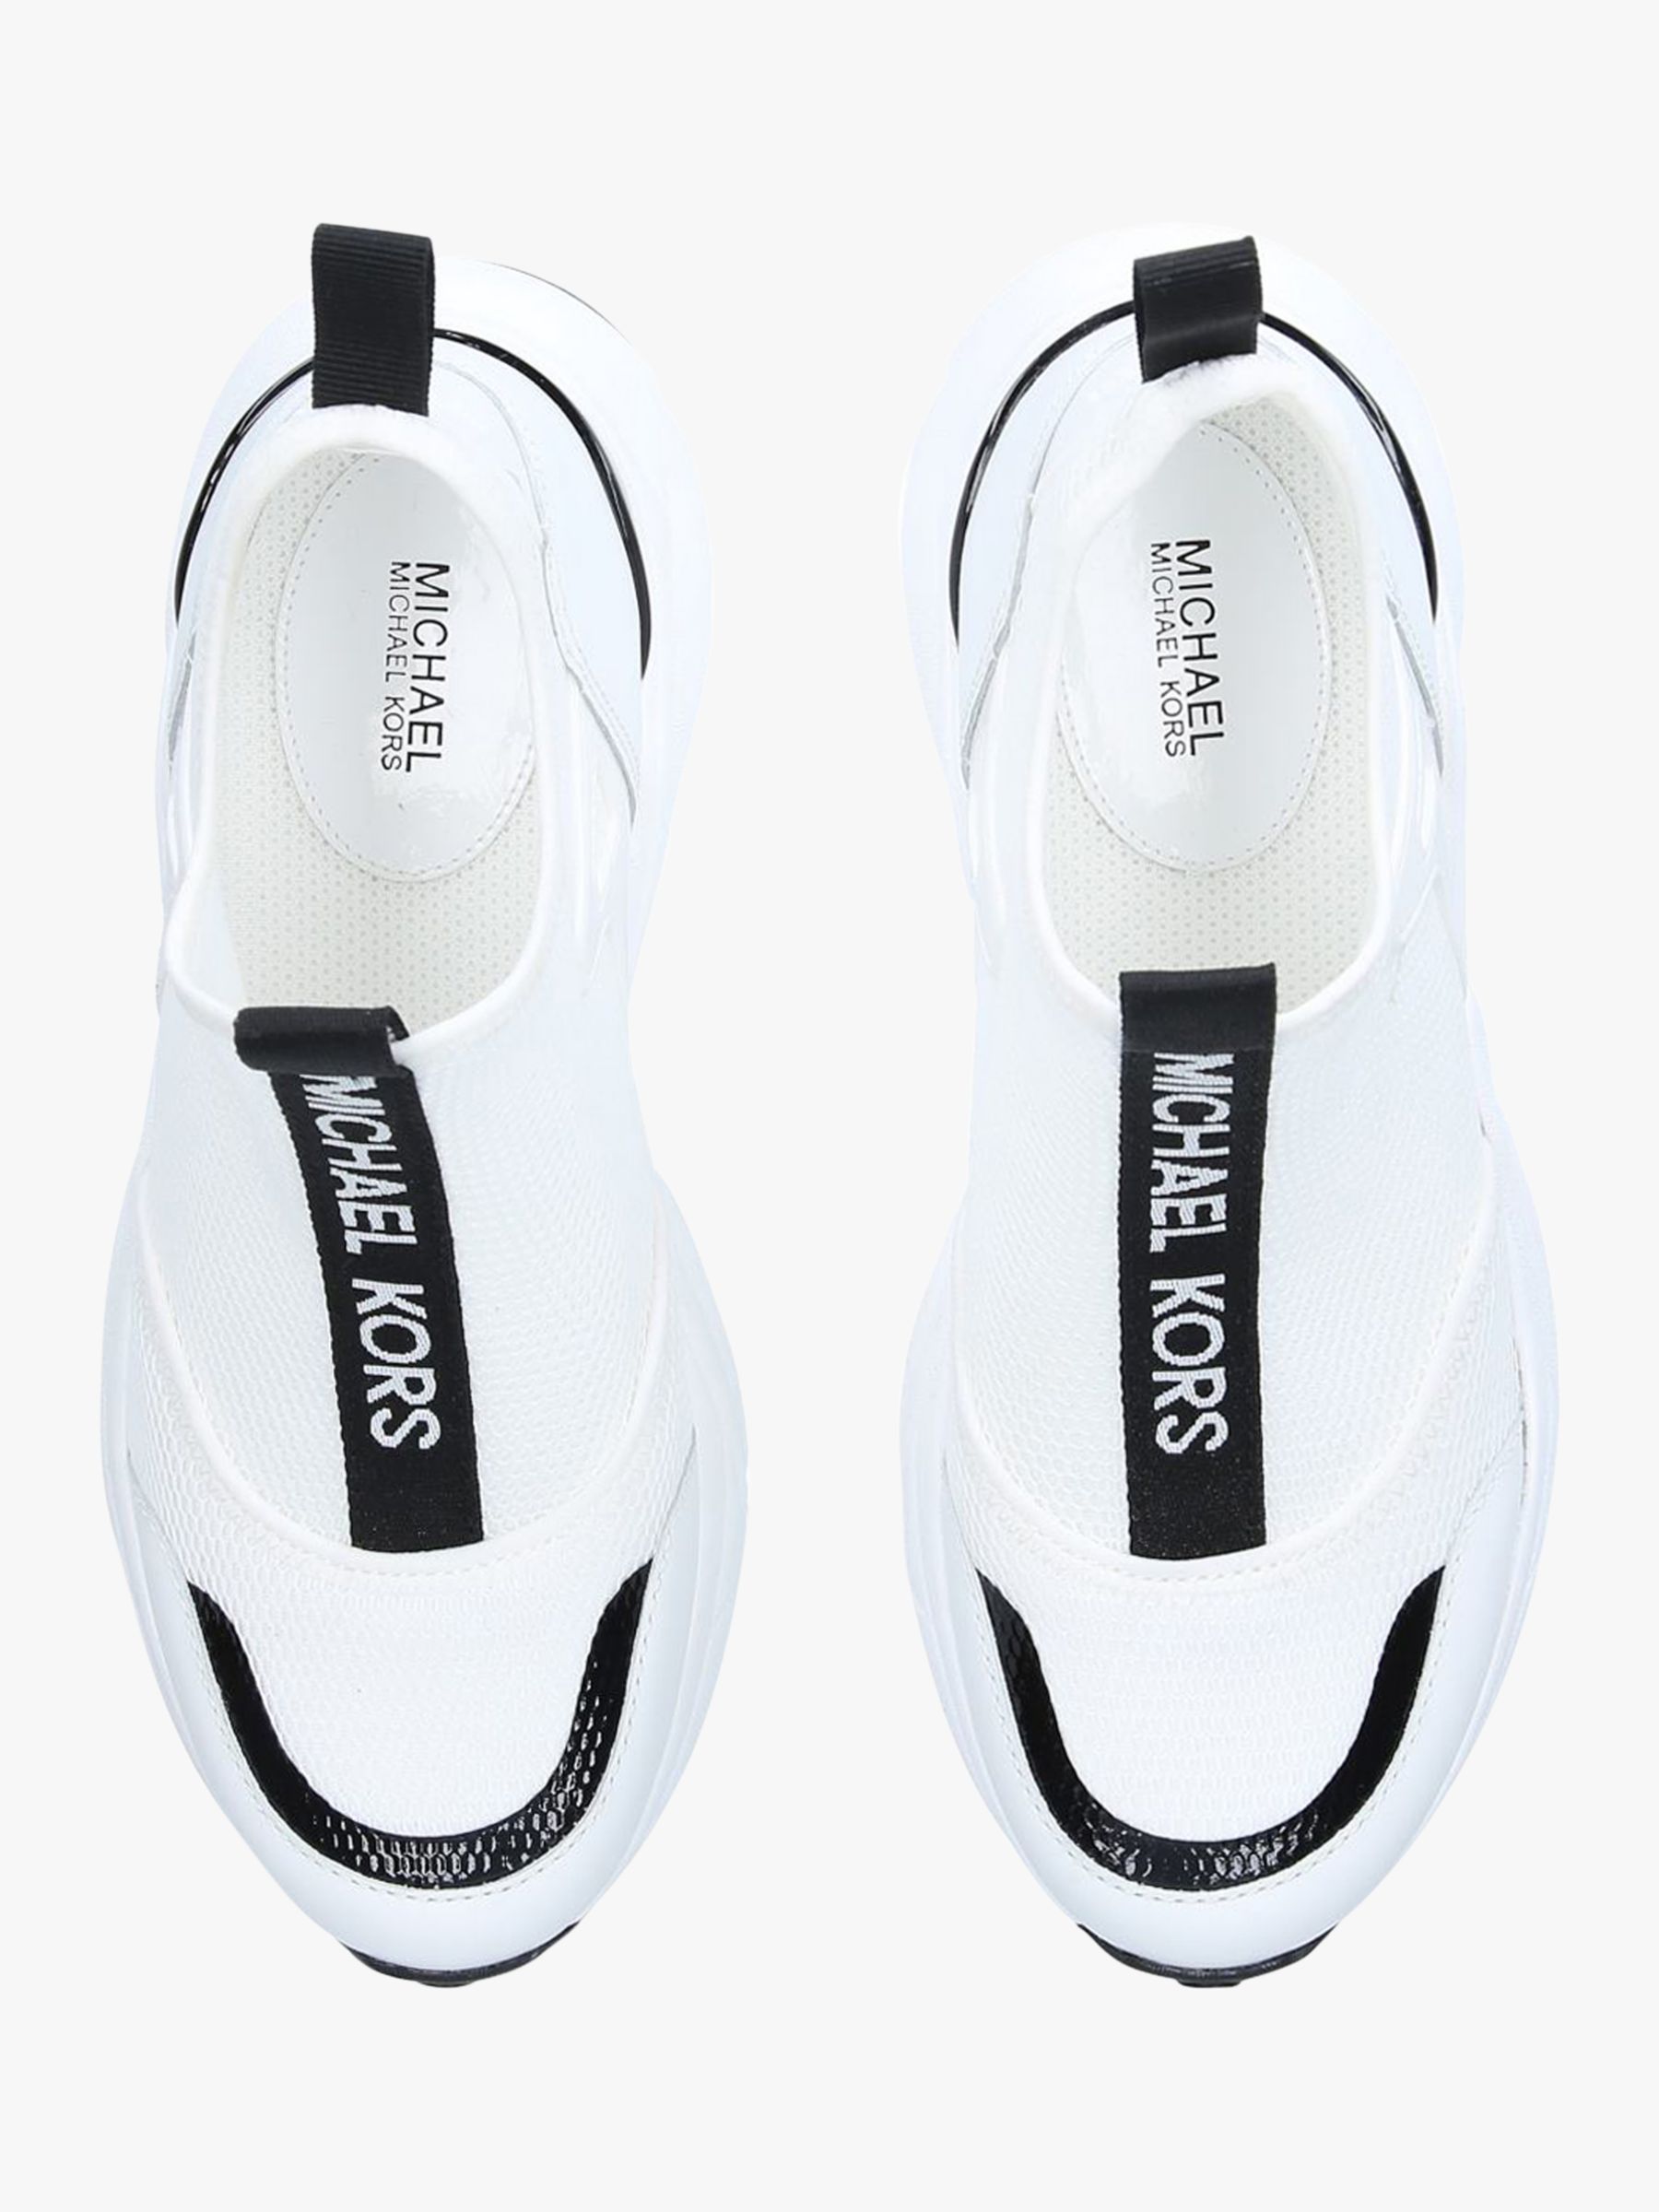 black and white michael kors shoes